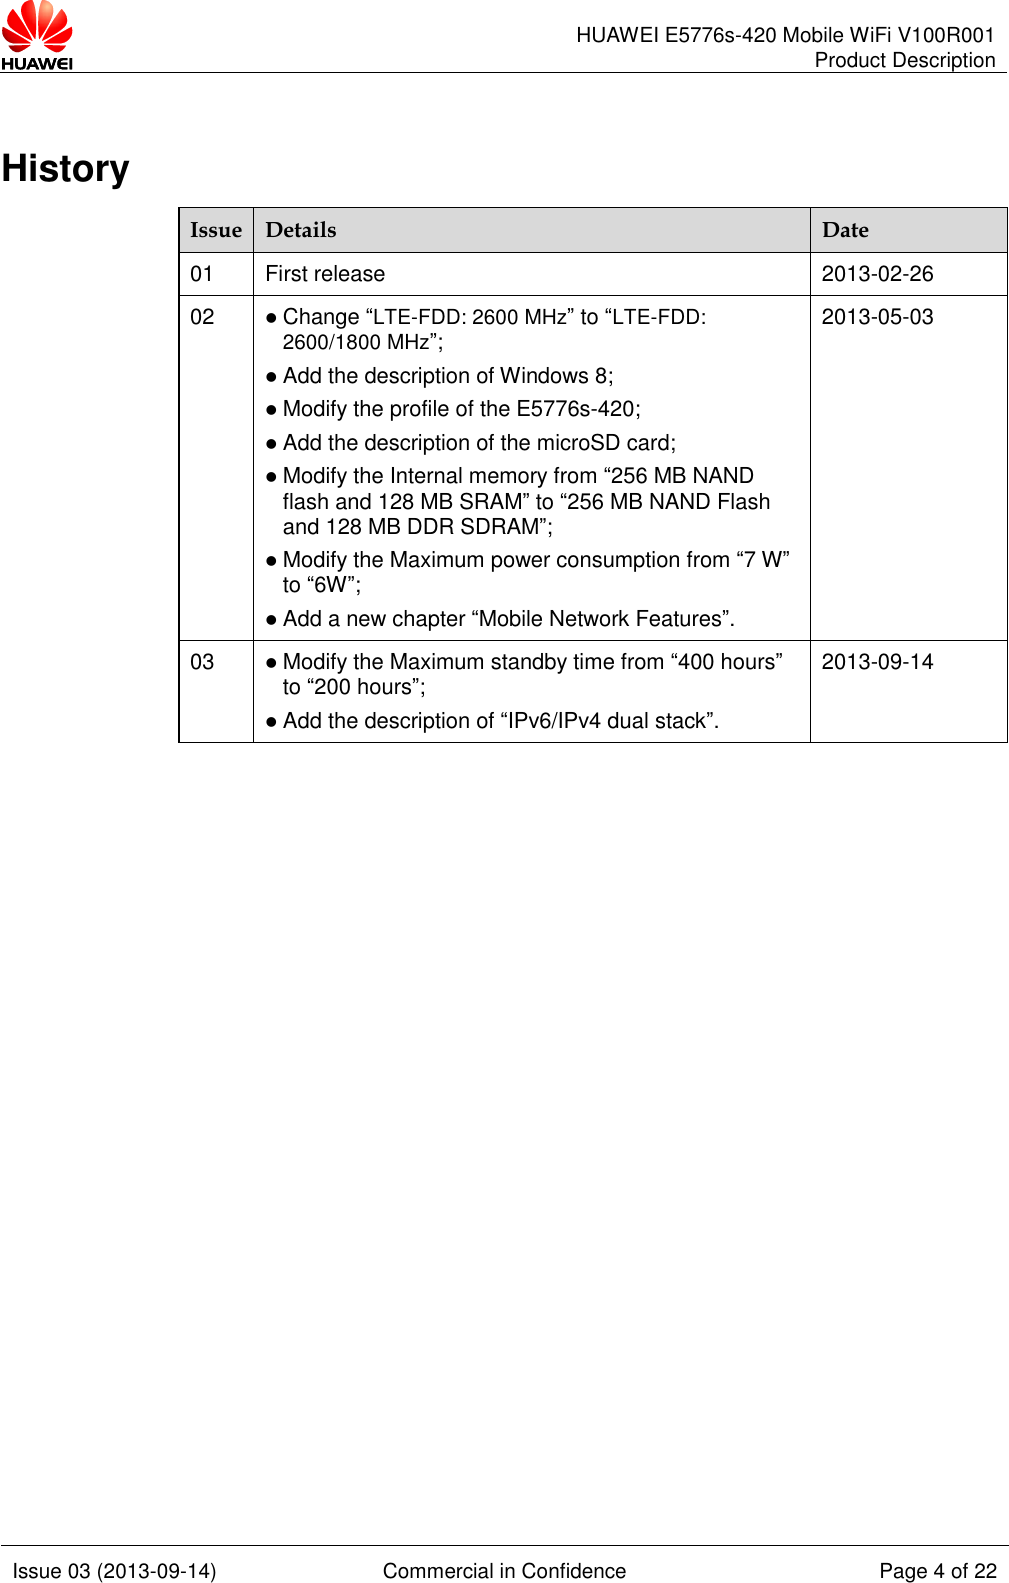      HUAWEI E5776s-420 Mobile WiFi V100R001 Product Description    Issue 03 (2013-09-14) Commercial in Confidence Page 4 of 22  History Issue Details Date 01 First release 2013-02-26 02  Change “LTE-FDD: 2600 MHz” to “LTE-FDD: 2600/1800 MHz”;  Add the description of Windows 8;  Modify the profile of the E5776s-420;  Add the description of the microSD card;  Modify the Internal memory from “256 MB NAND flash and 128 MB SRAM” to “256 MB NAND Flash and 128 MB DDR SDRAM”;  Modify the Maximum power consumption from “7 W” to “6W”;  Add a new chapter “Mobile Network Features”. 2013-05-03 03  Modify the Maximum standby time from “400 hours” to “200 hours”;  Add the description of “IPv6/IPv4 dual stack”. 2013-09-14 